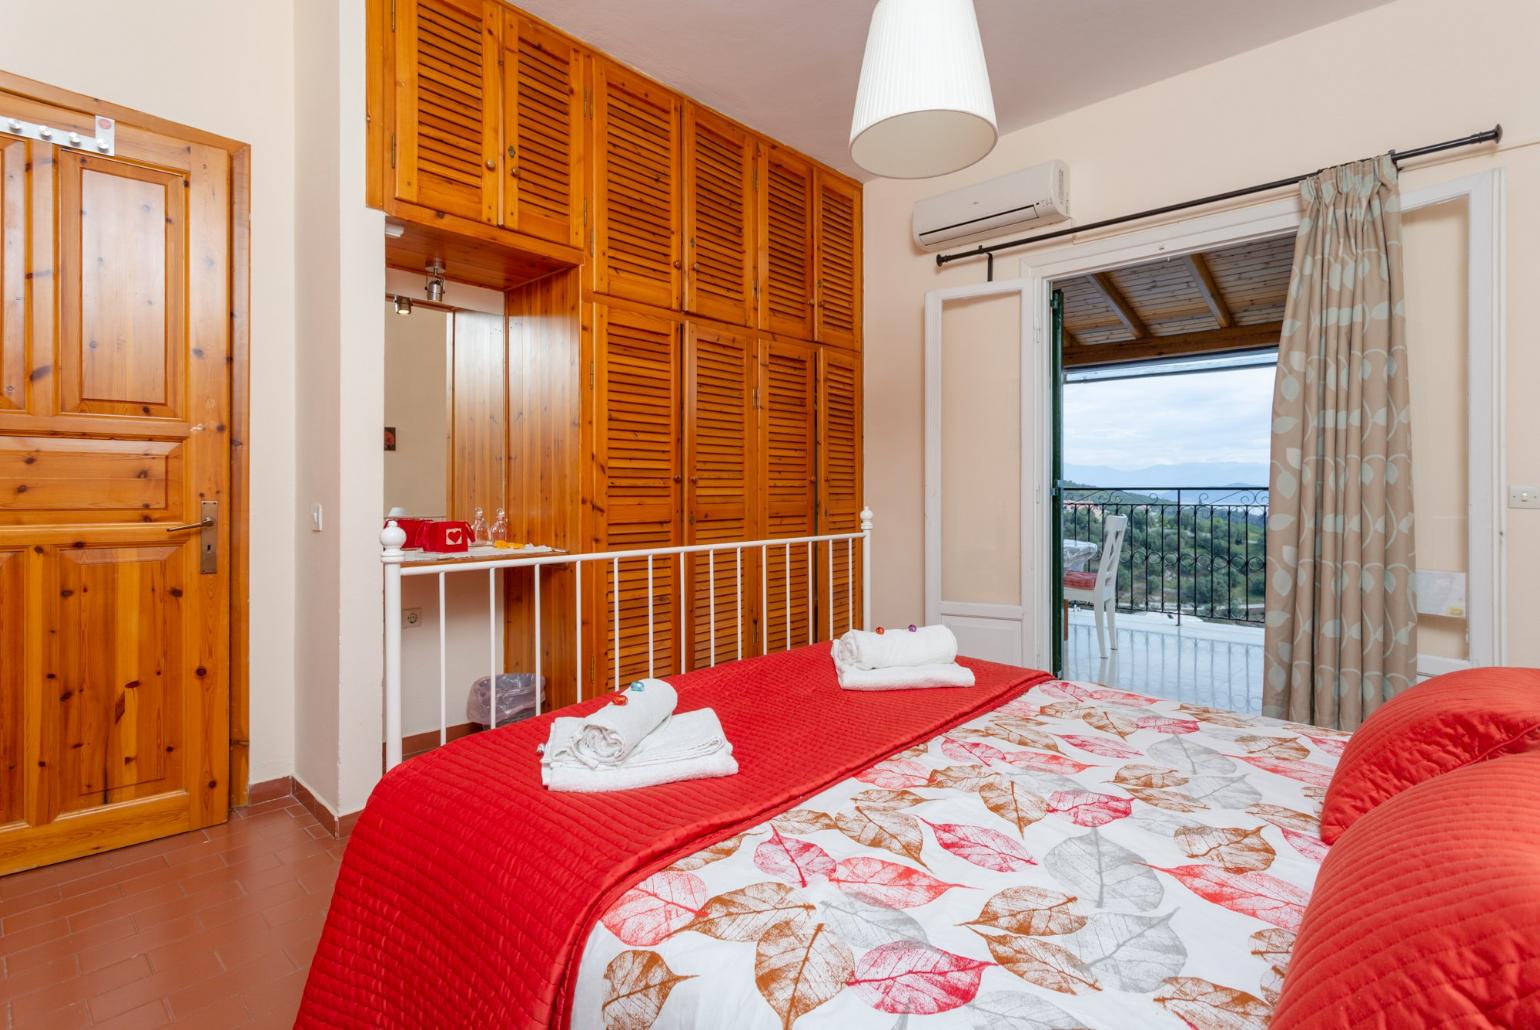 Double bedroom on first floor with A/C and balcony access with sea views